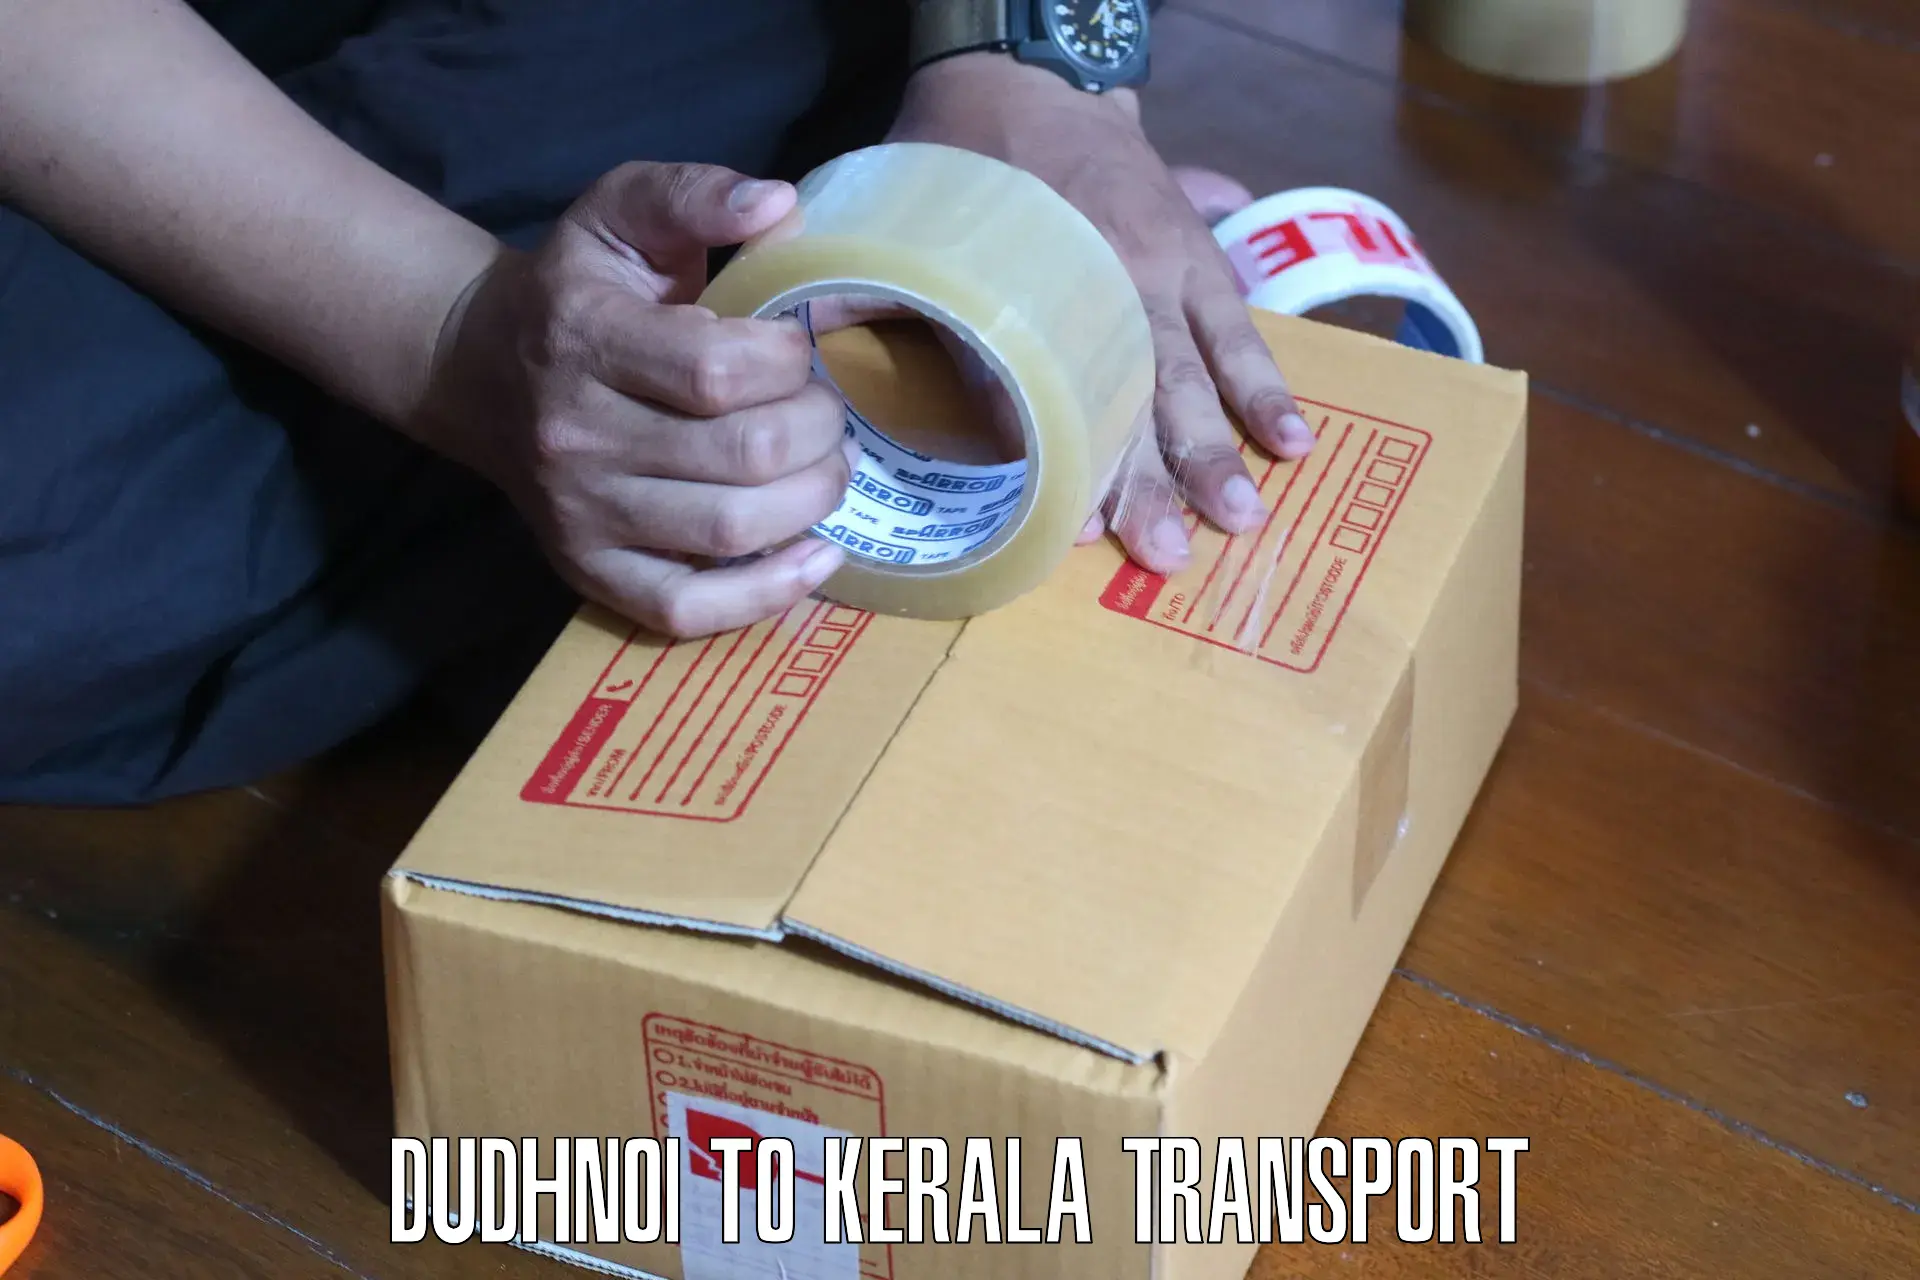 Furniture transport service Dudhnoi to Angamaly